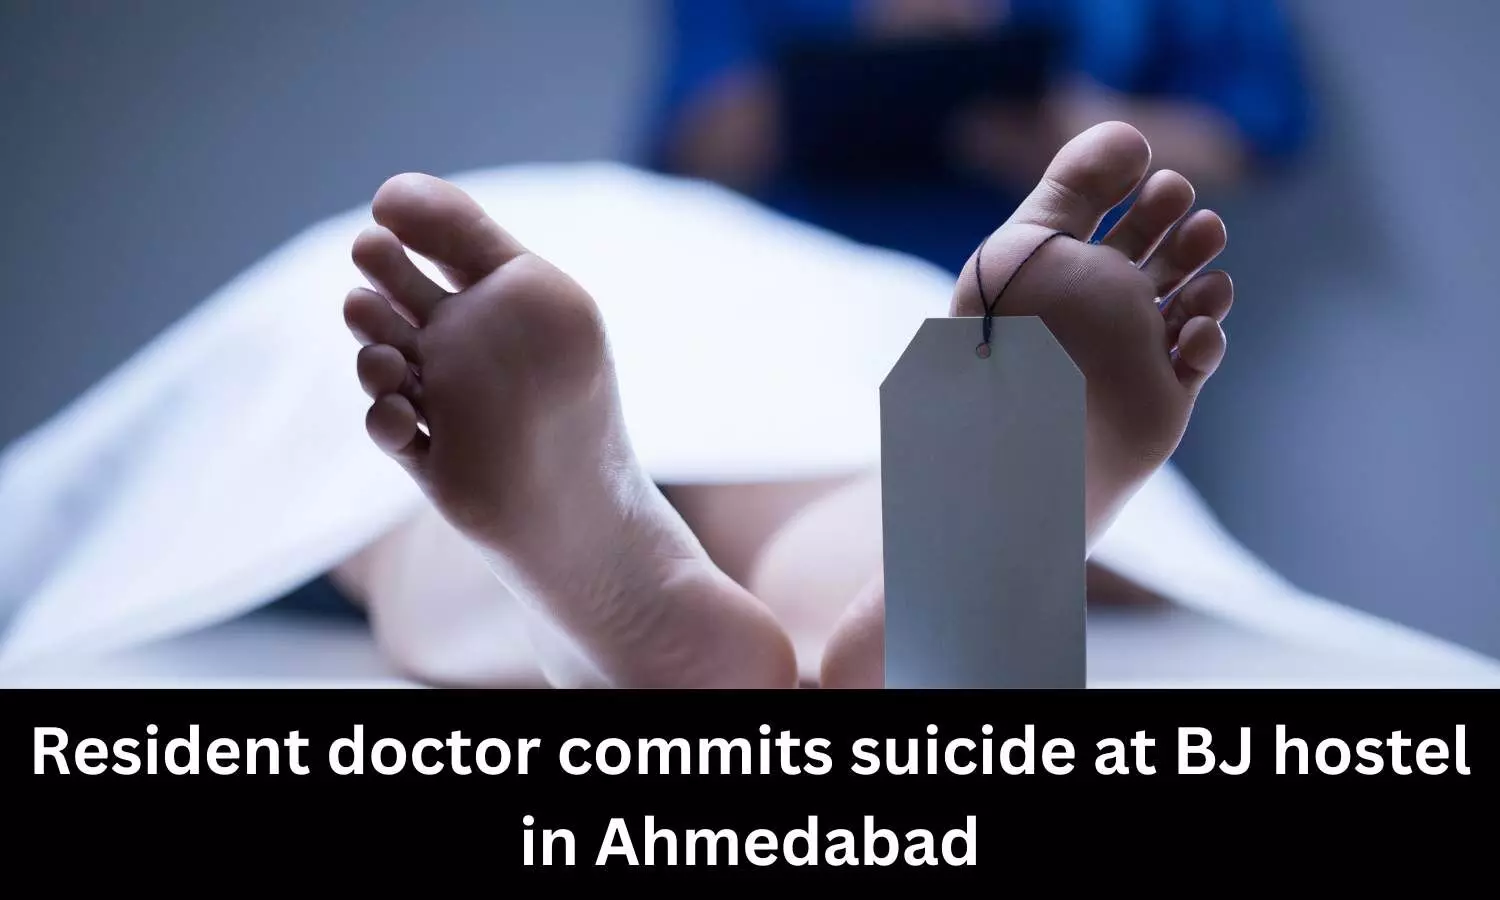 Third-year MD medicine resident doctor of BJ Medical College commits suicide